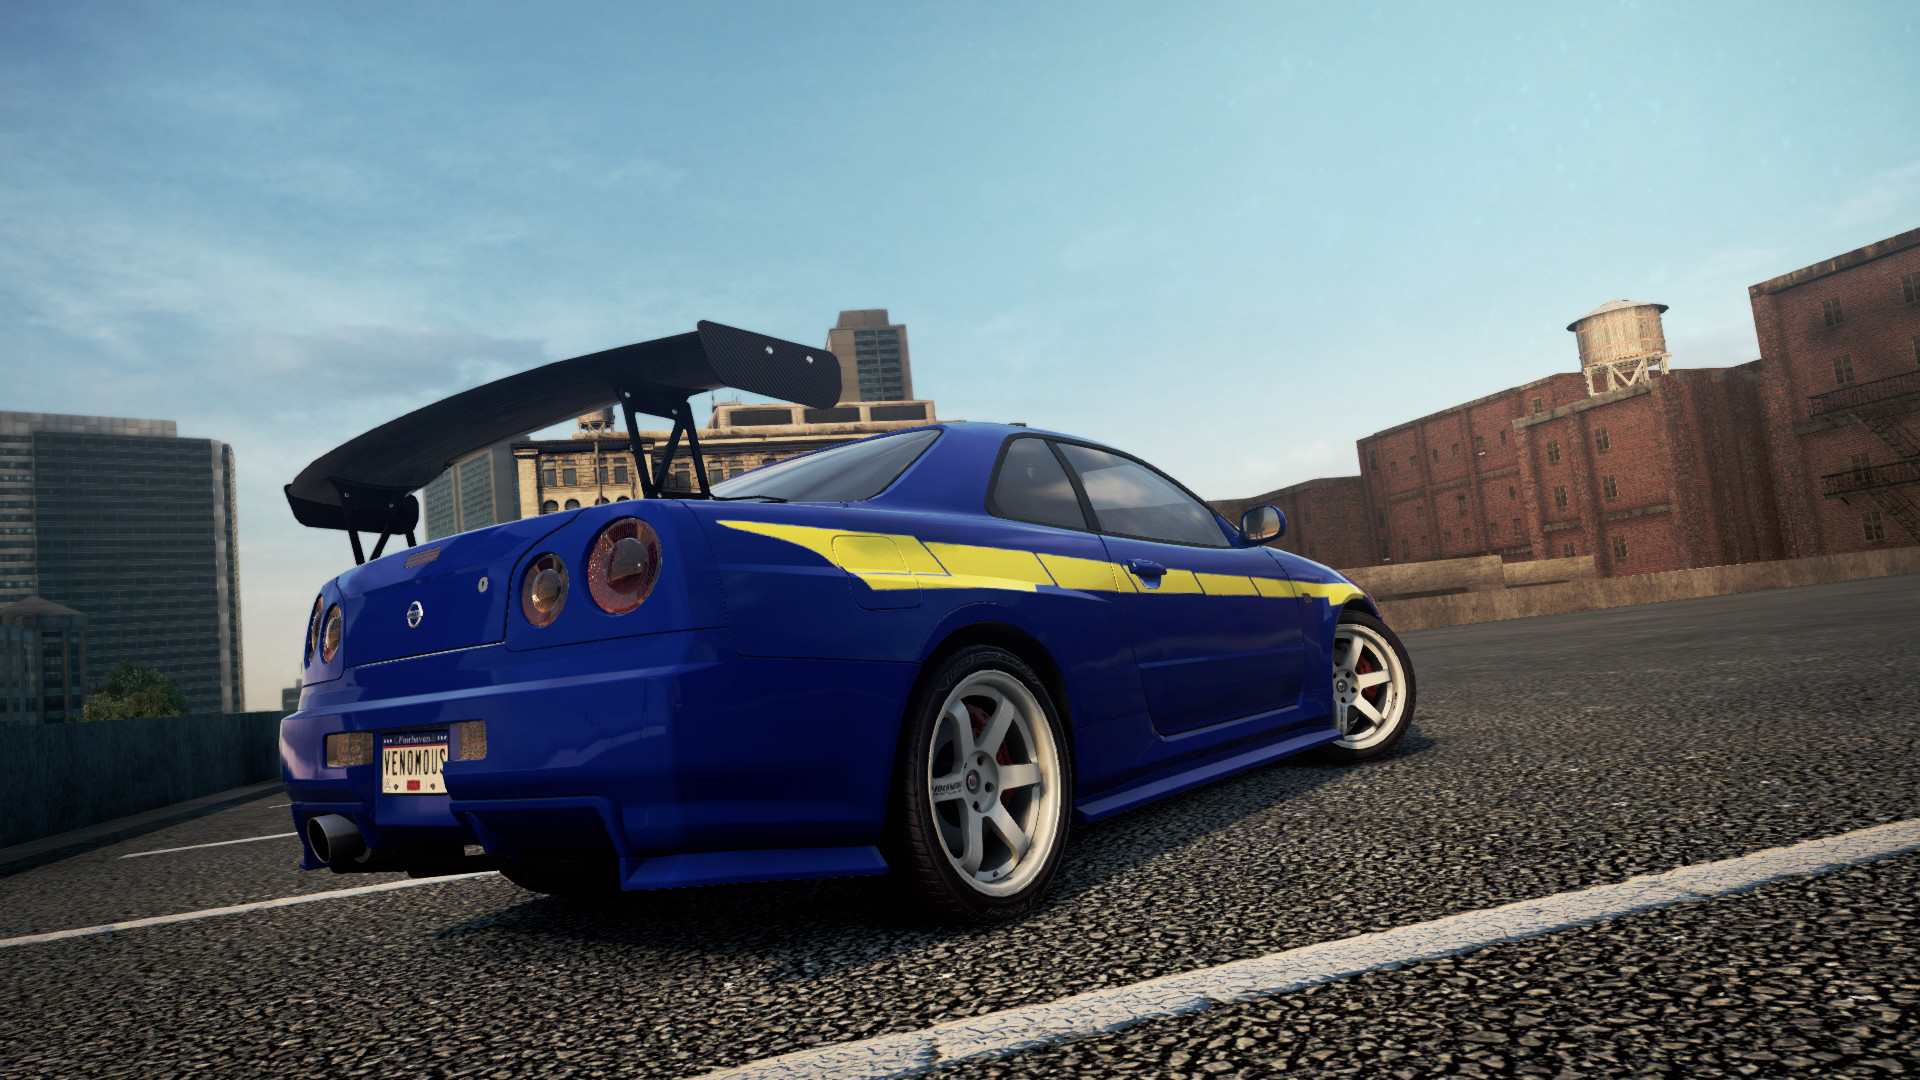 Need For Speed Most Wanted 2012 NFSMW12 - Underground 2 Skyline Livery